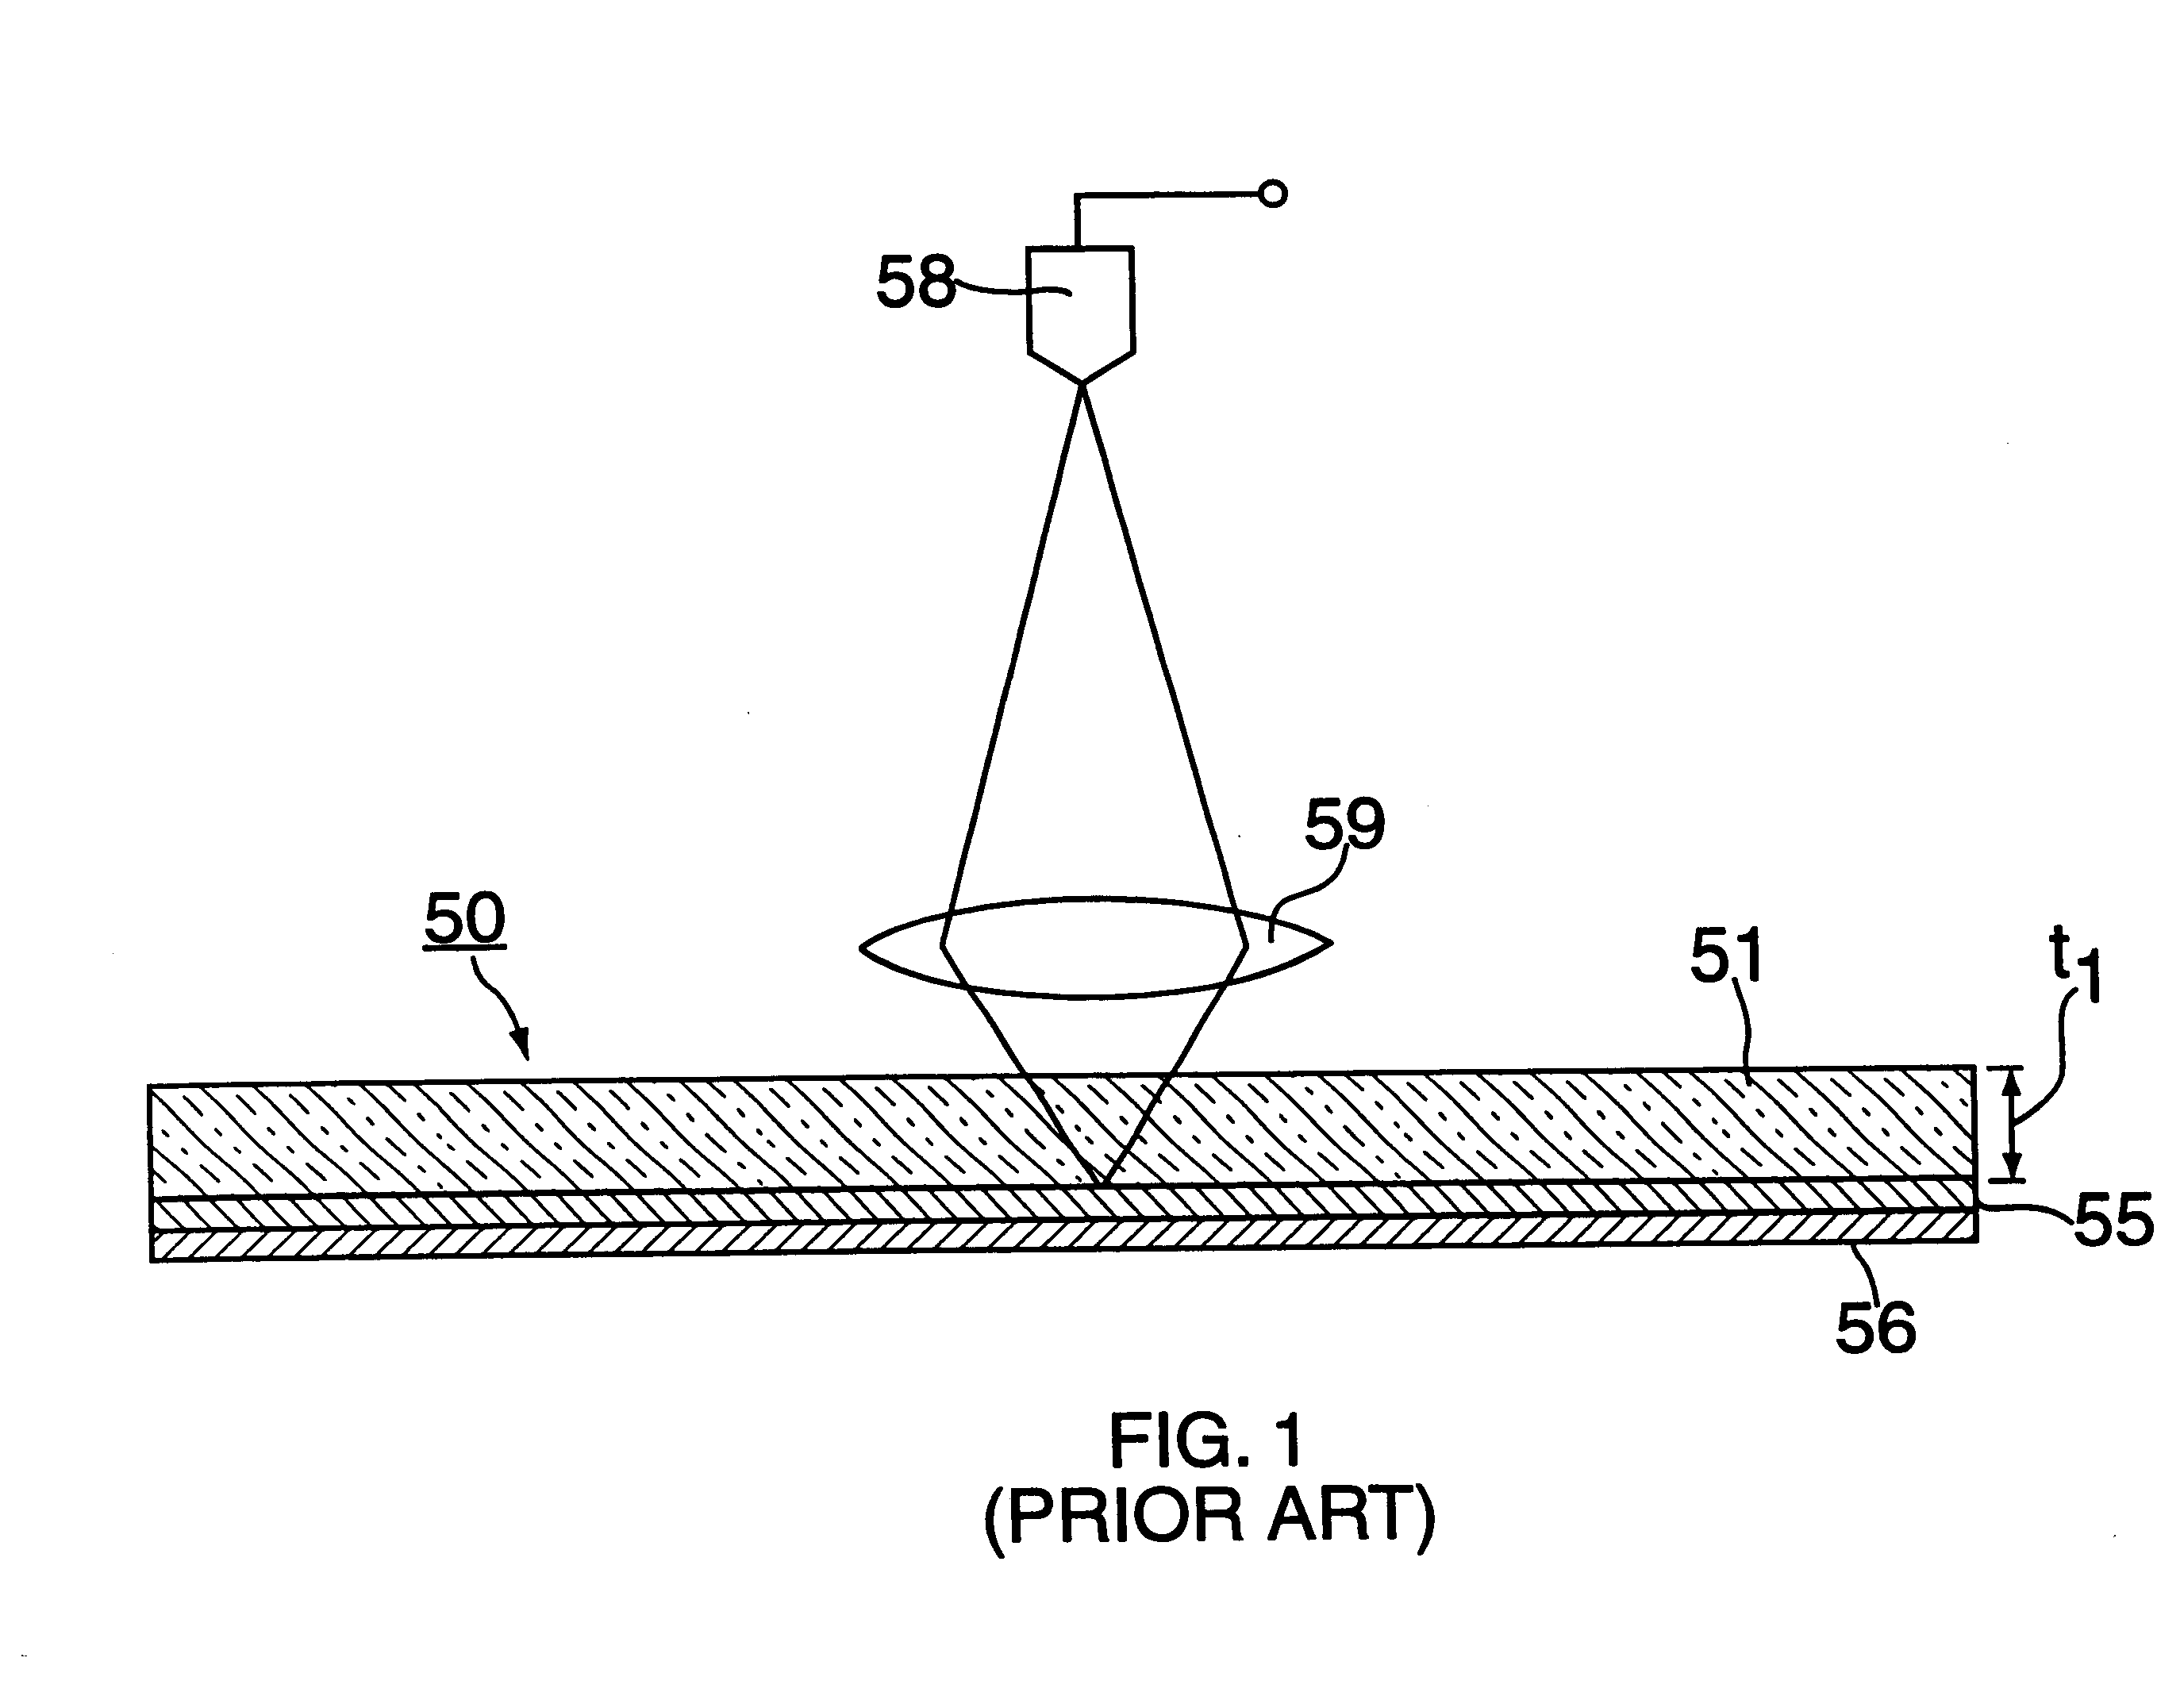 Optical disk having a protective layer specified thickness relative to the NA of an objective lens and the wavelength of light source